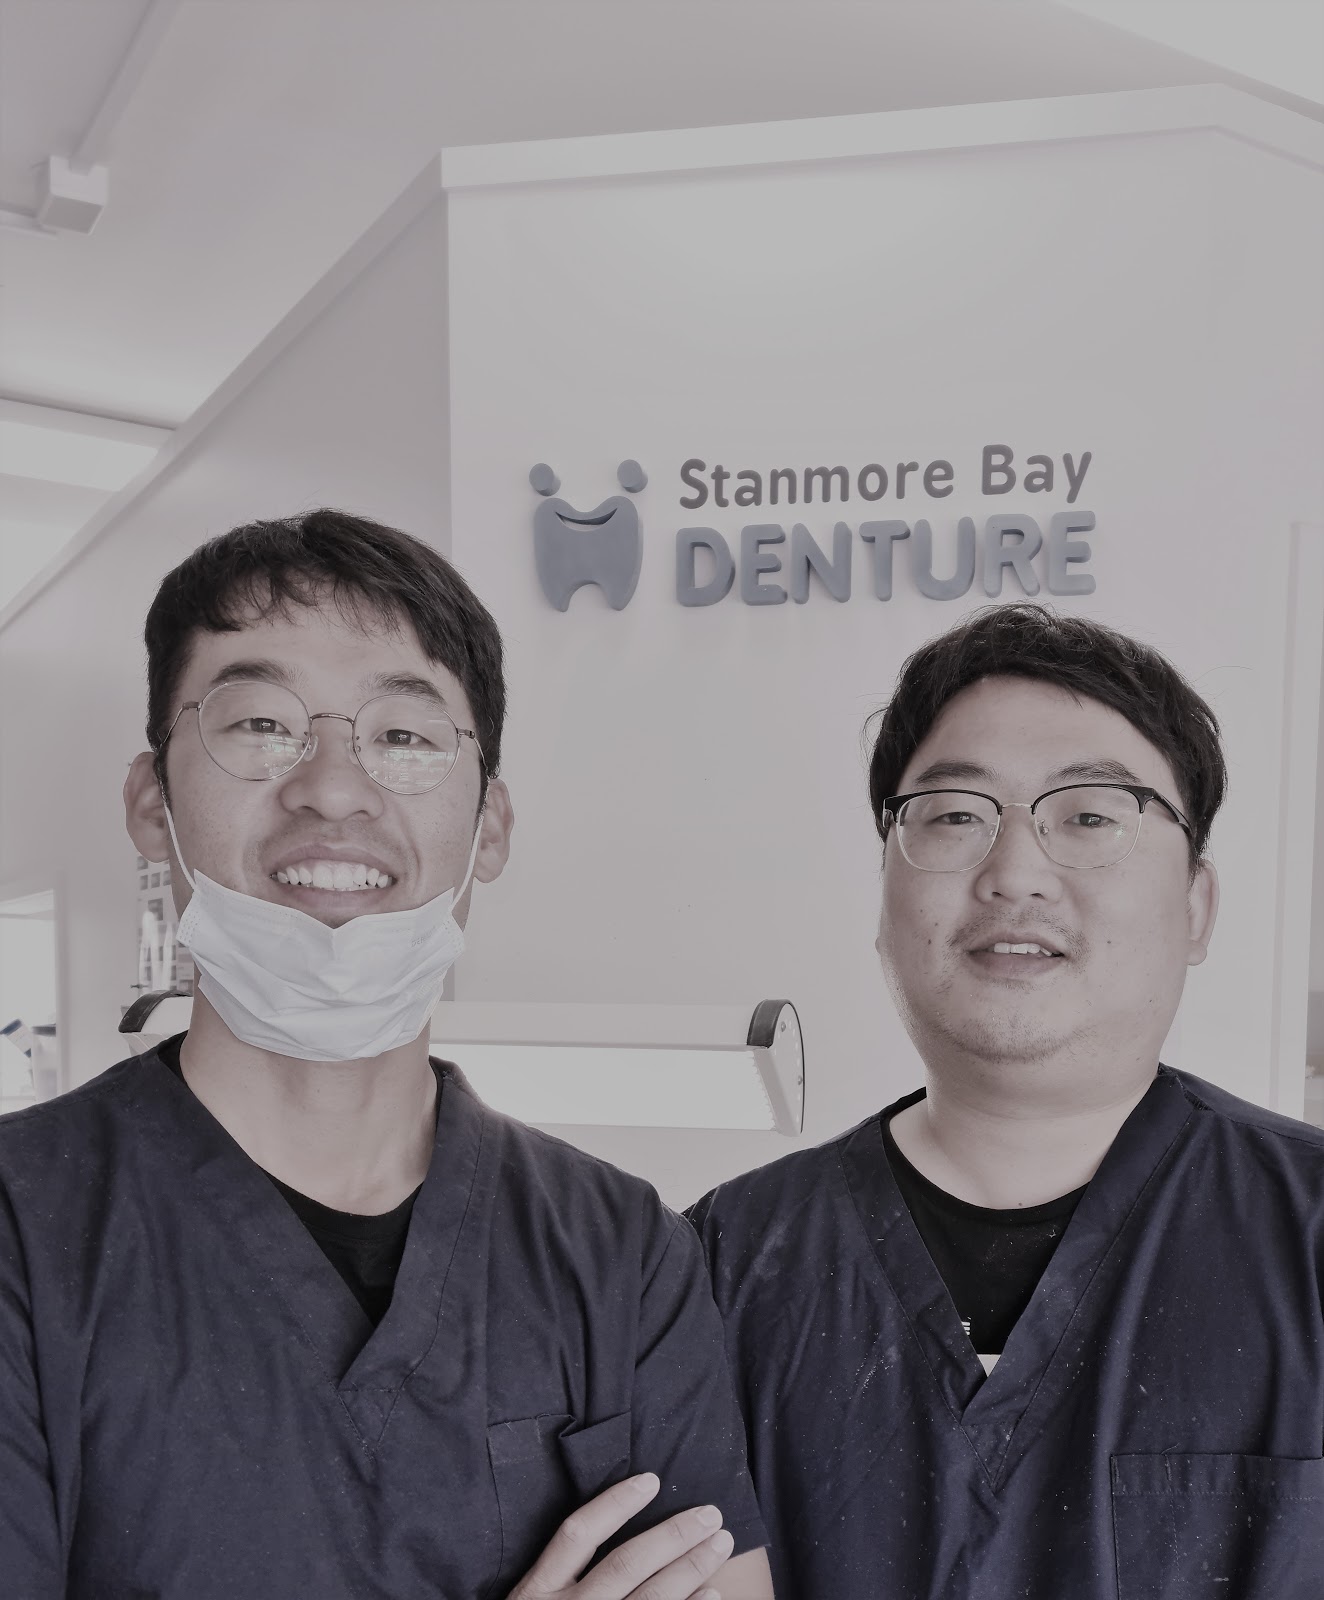 Our friendly Dentists